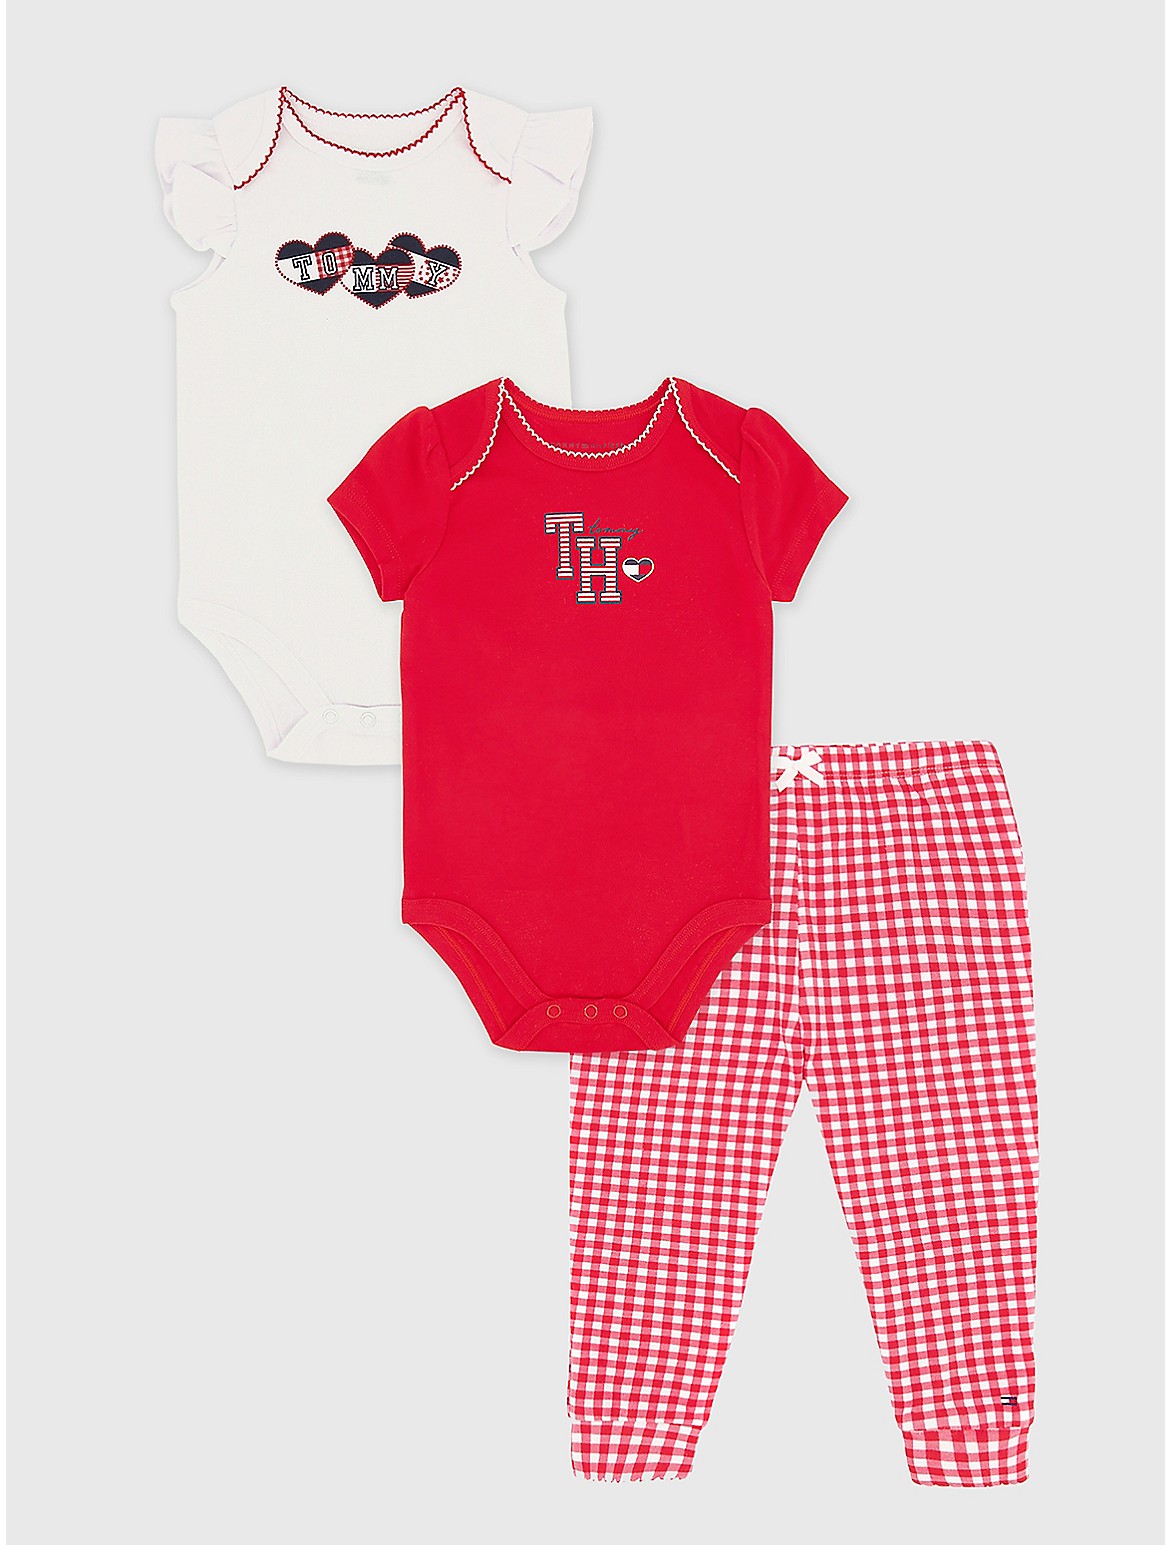 Tommy Hilfiger Girls' Babies' Onesie and Pant Set 3PC - Multi - 12M